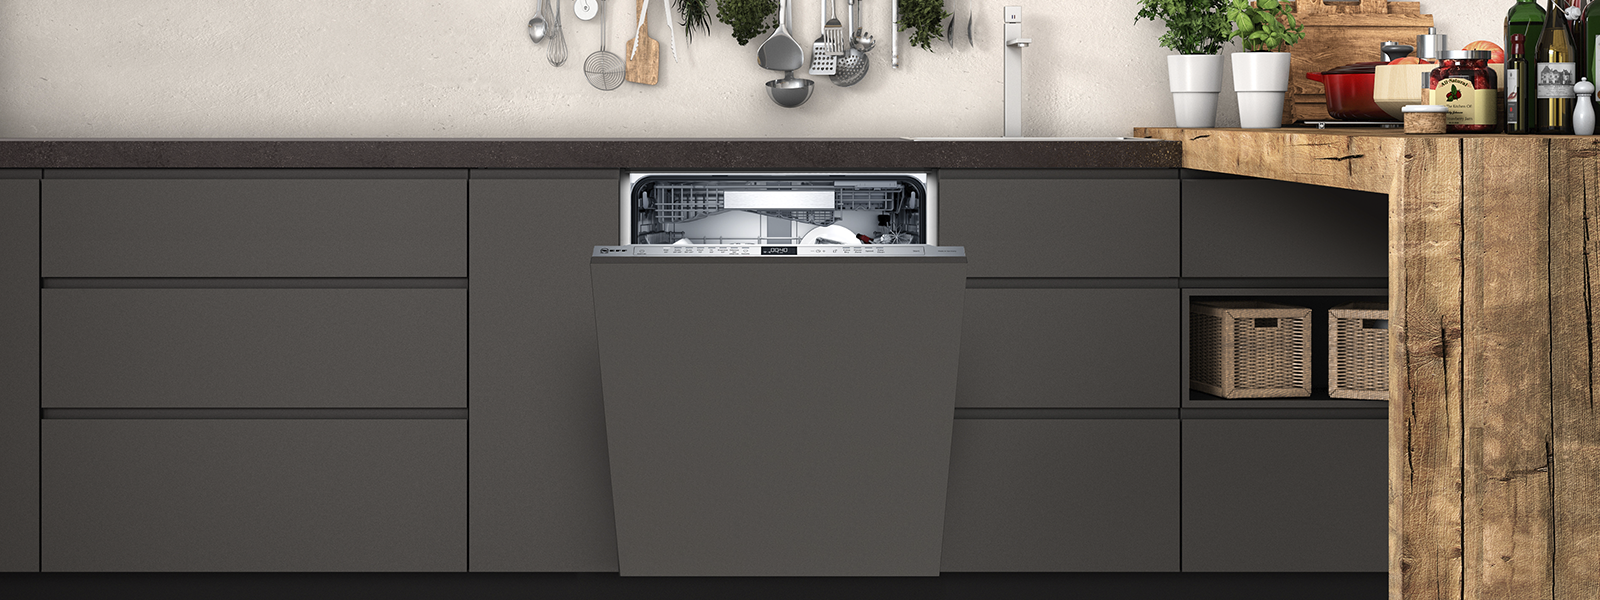 Save Up To $300* on Selected NEFF Dishwashers at Hart & Co